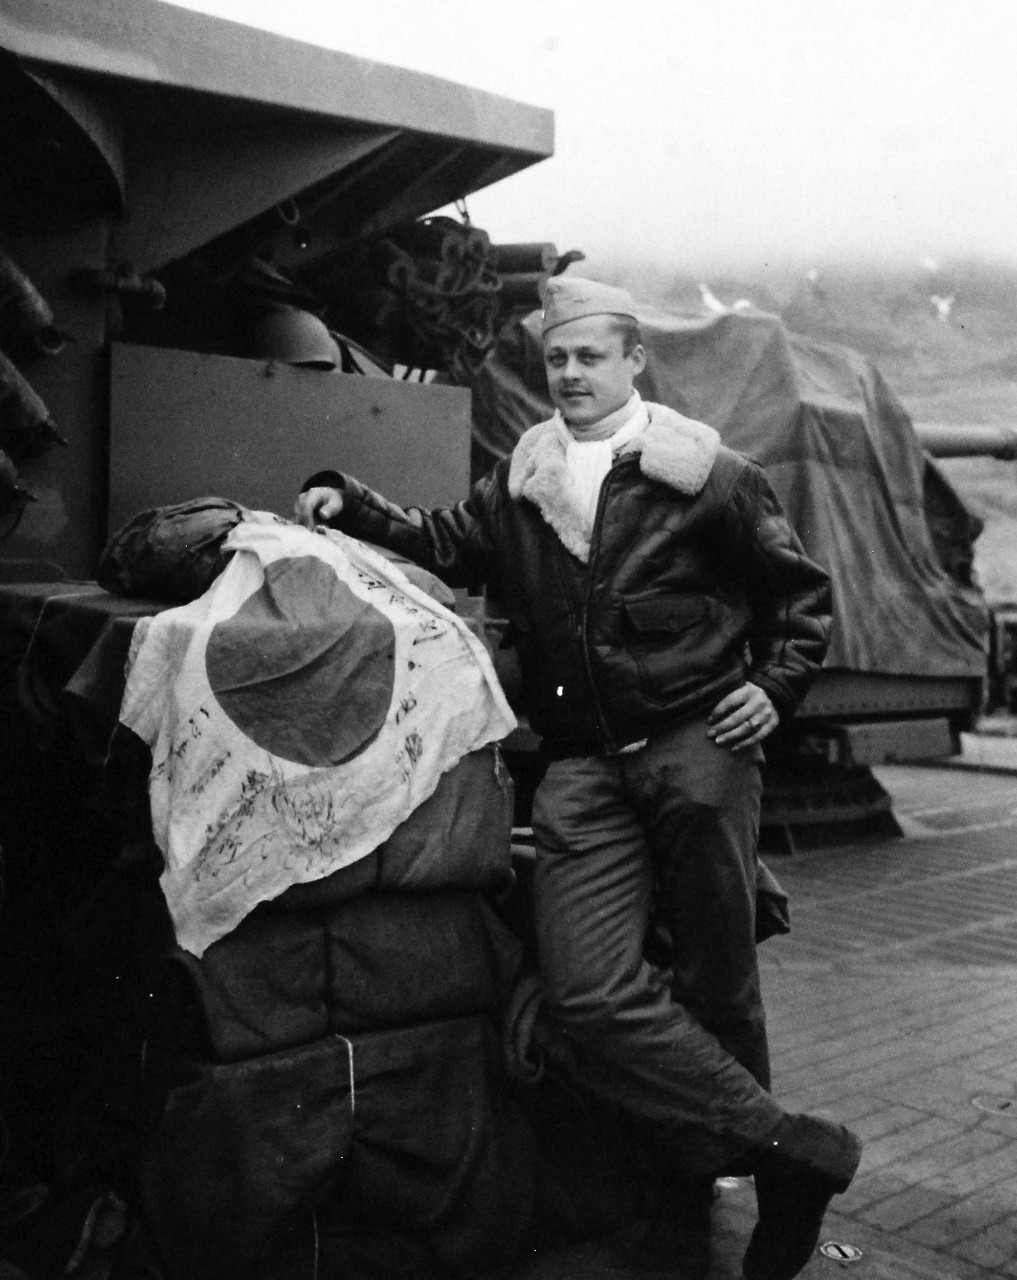 80-G-77098:   Aleutian Island Campaign, June 1942-August 1943. Battle of Attu, May 11-29, 1943.    Lieutenant Junior Grade Harris O. Torgerson displaying his Japanese flag on a pile of captured blankets on a pile of captured blankets aboard USS Casco (AYP-12) at Attu, Alaska.    Released May 14, 1943.   Official U.S. Navy photograph, now in the collections of the National Archives.  (2017/01/10).